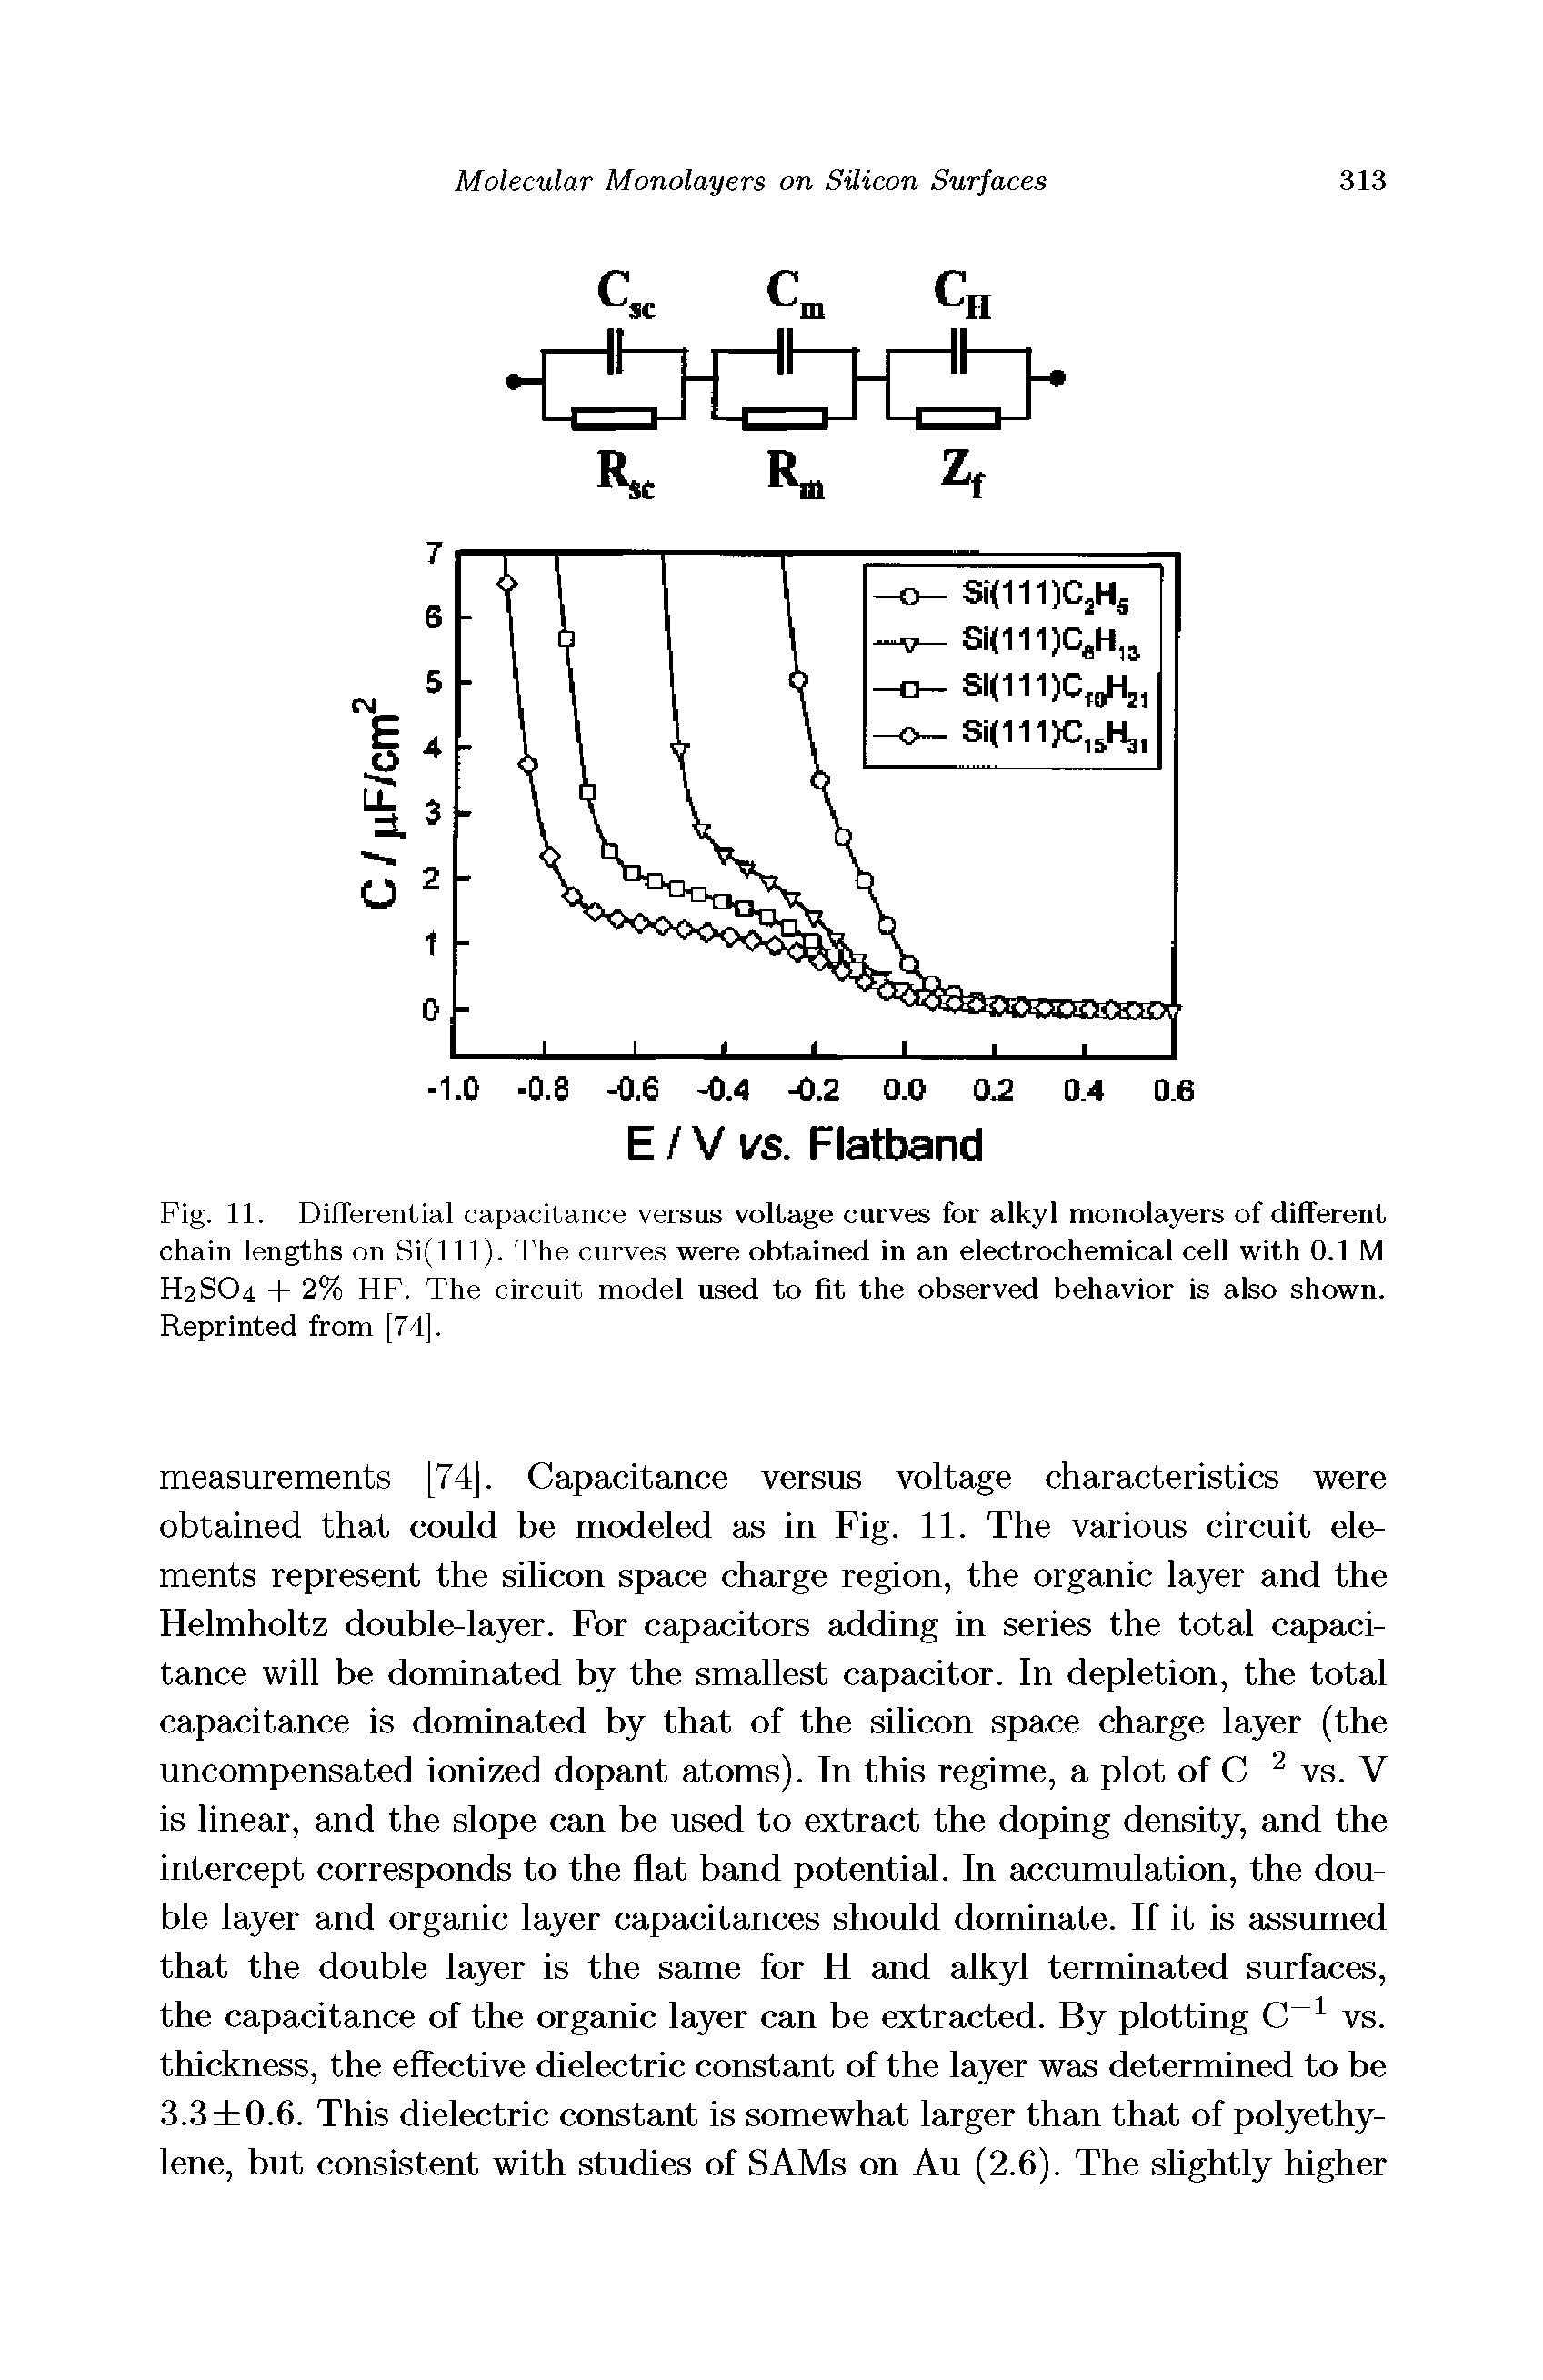 Fig. 11. Differential capacitance versus voltage curves for alkyl monolayers of different chain lengths on Si(lll). The curves were obtained in an electrochemical cell with 0.1 M H2SO4 + 2% HF. The circuit model used to fit the observed behavior is also shown. Reprinted from [74],...